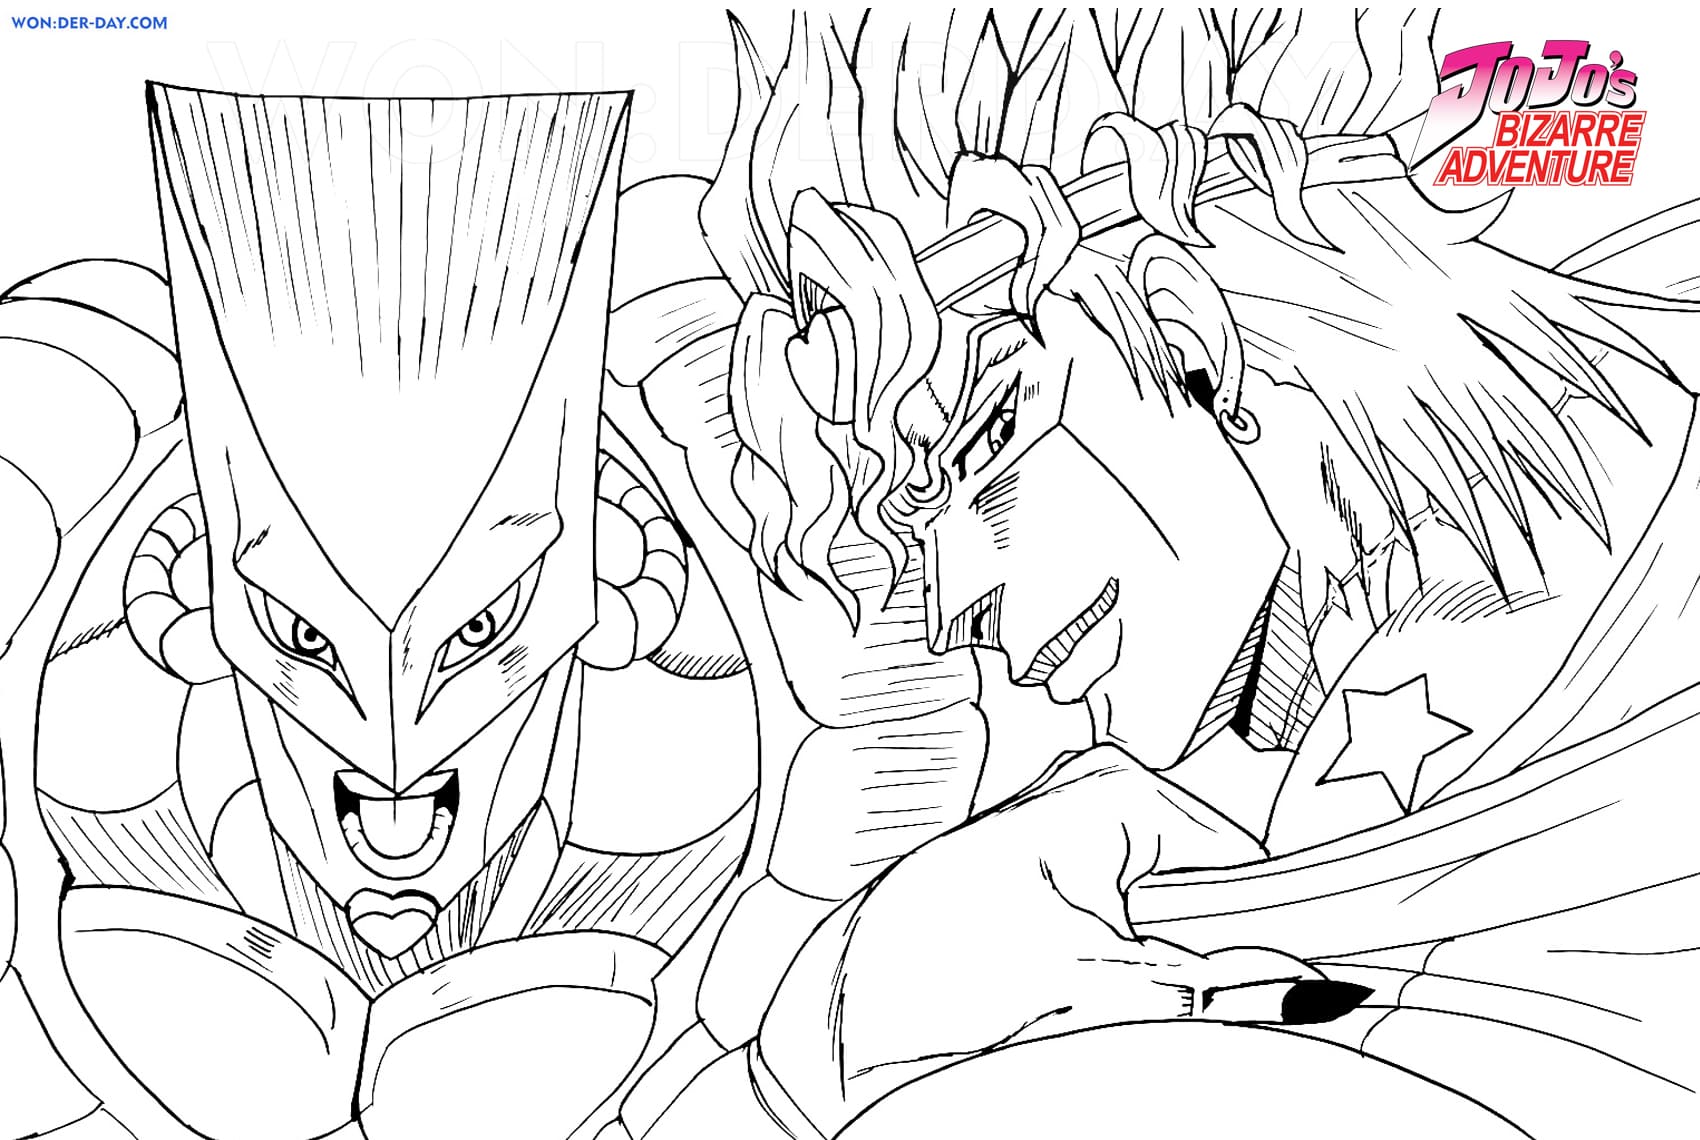 JoJo's Bizarre Adventure coloring pages | WONDER DAY — Coloring pages